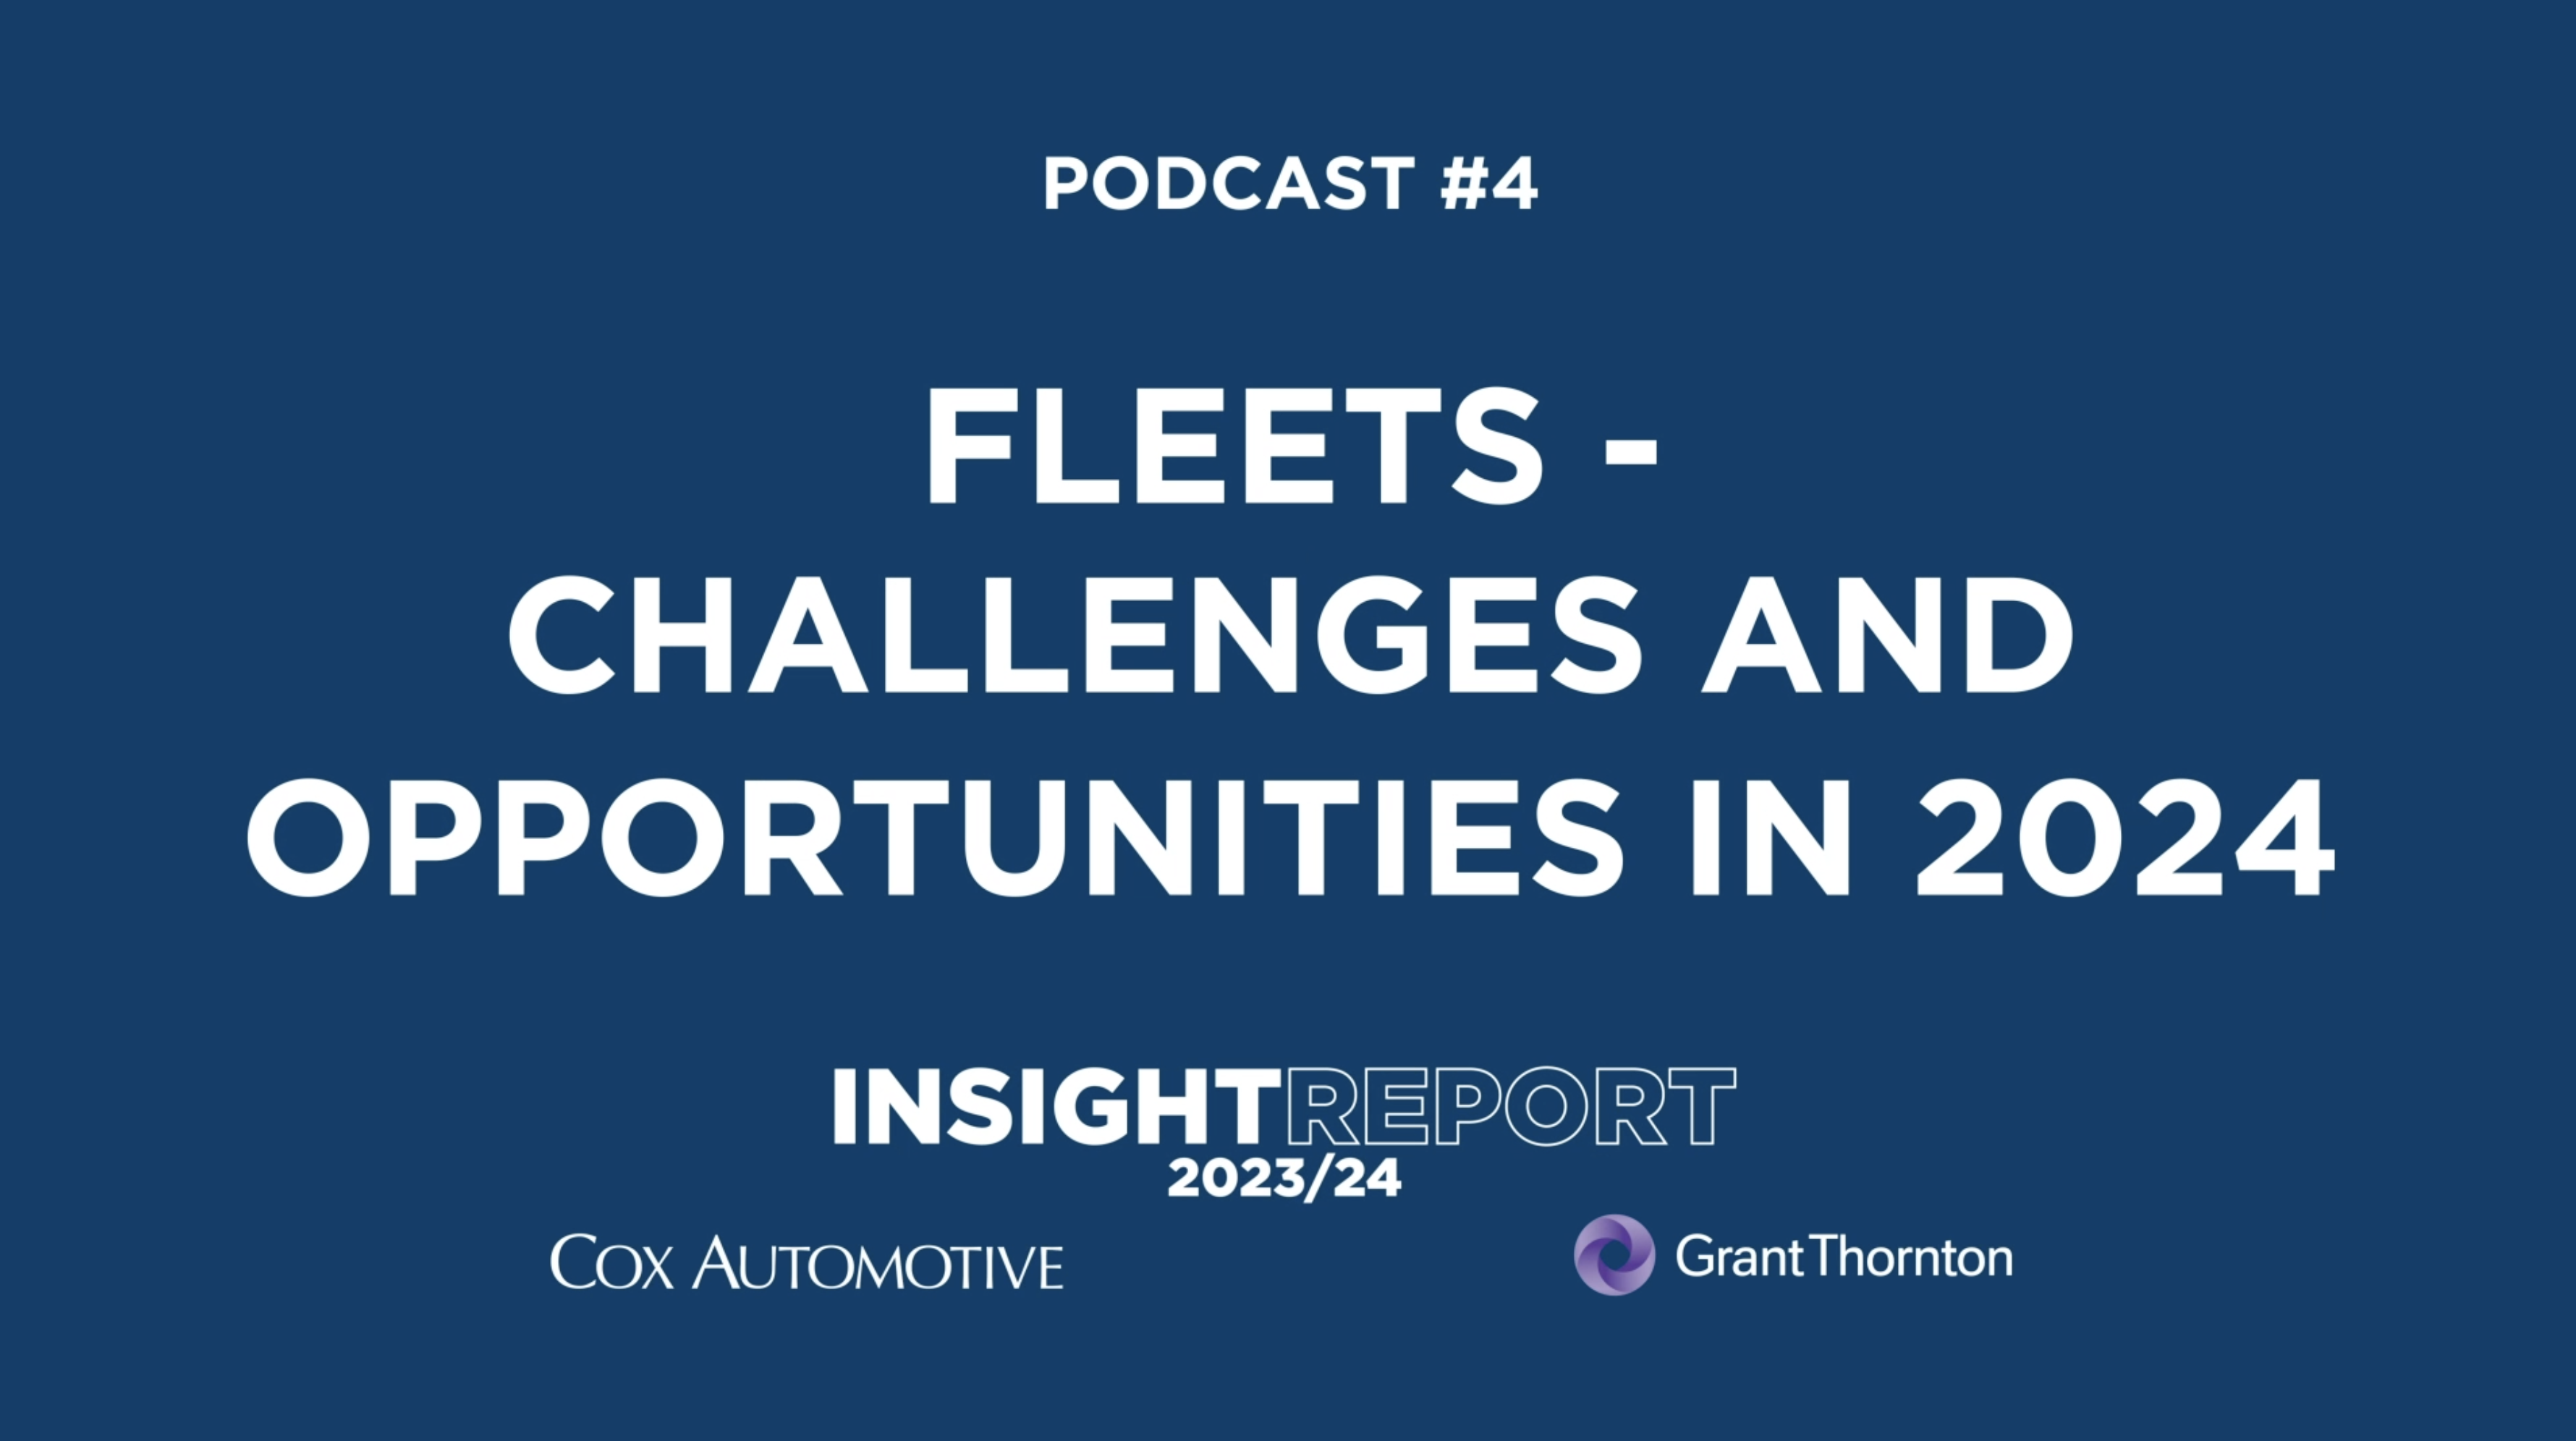 2024 challenges and opportunities for fleets | podcast